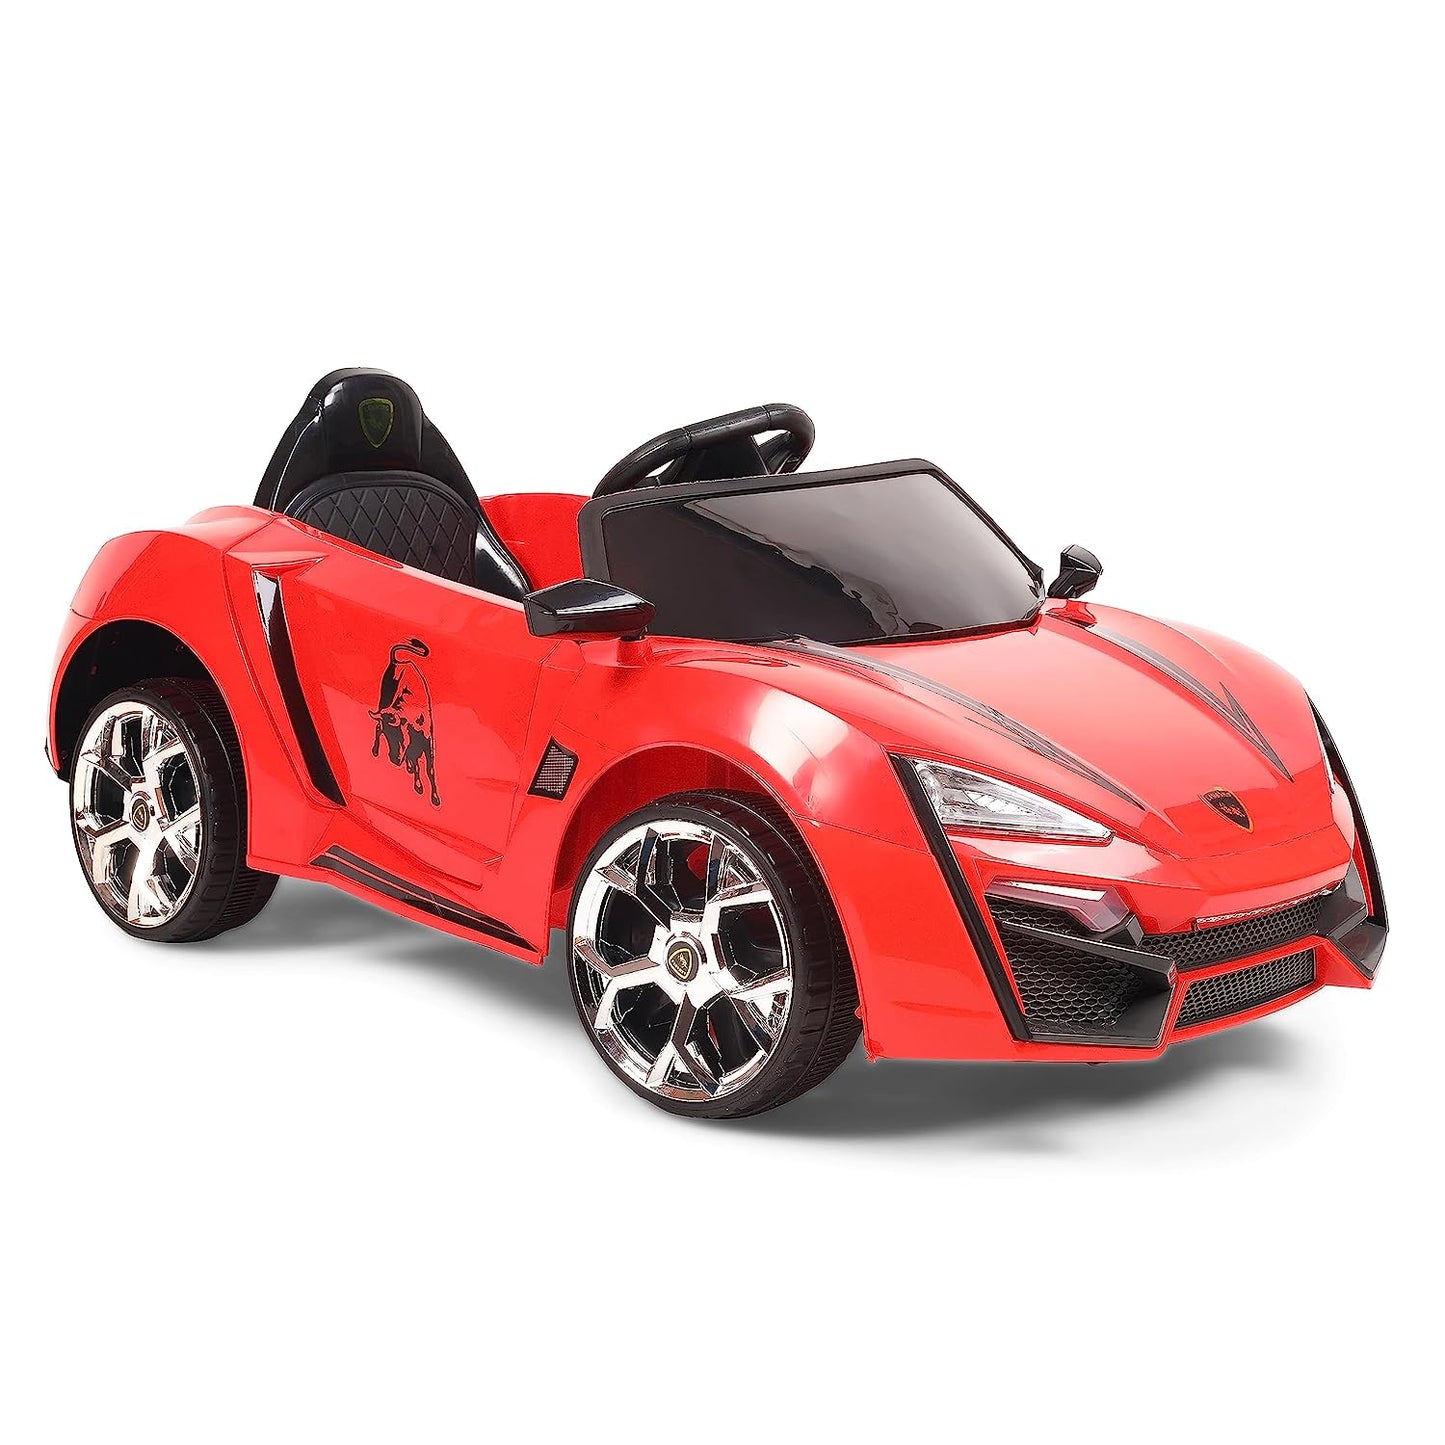 GettBoles Smoky Battery Operated Ride on Car with Music, Led Lights ad Bluetooth Remote Control- Electric Ride on Car with Colorful Smoke in The Back (Red)